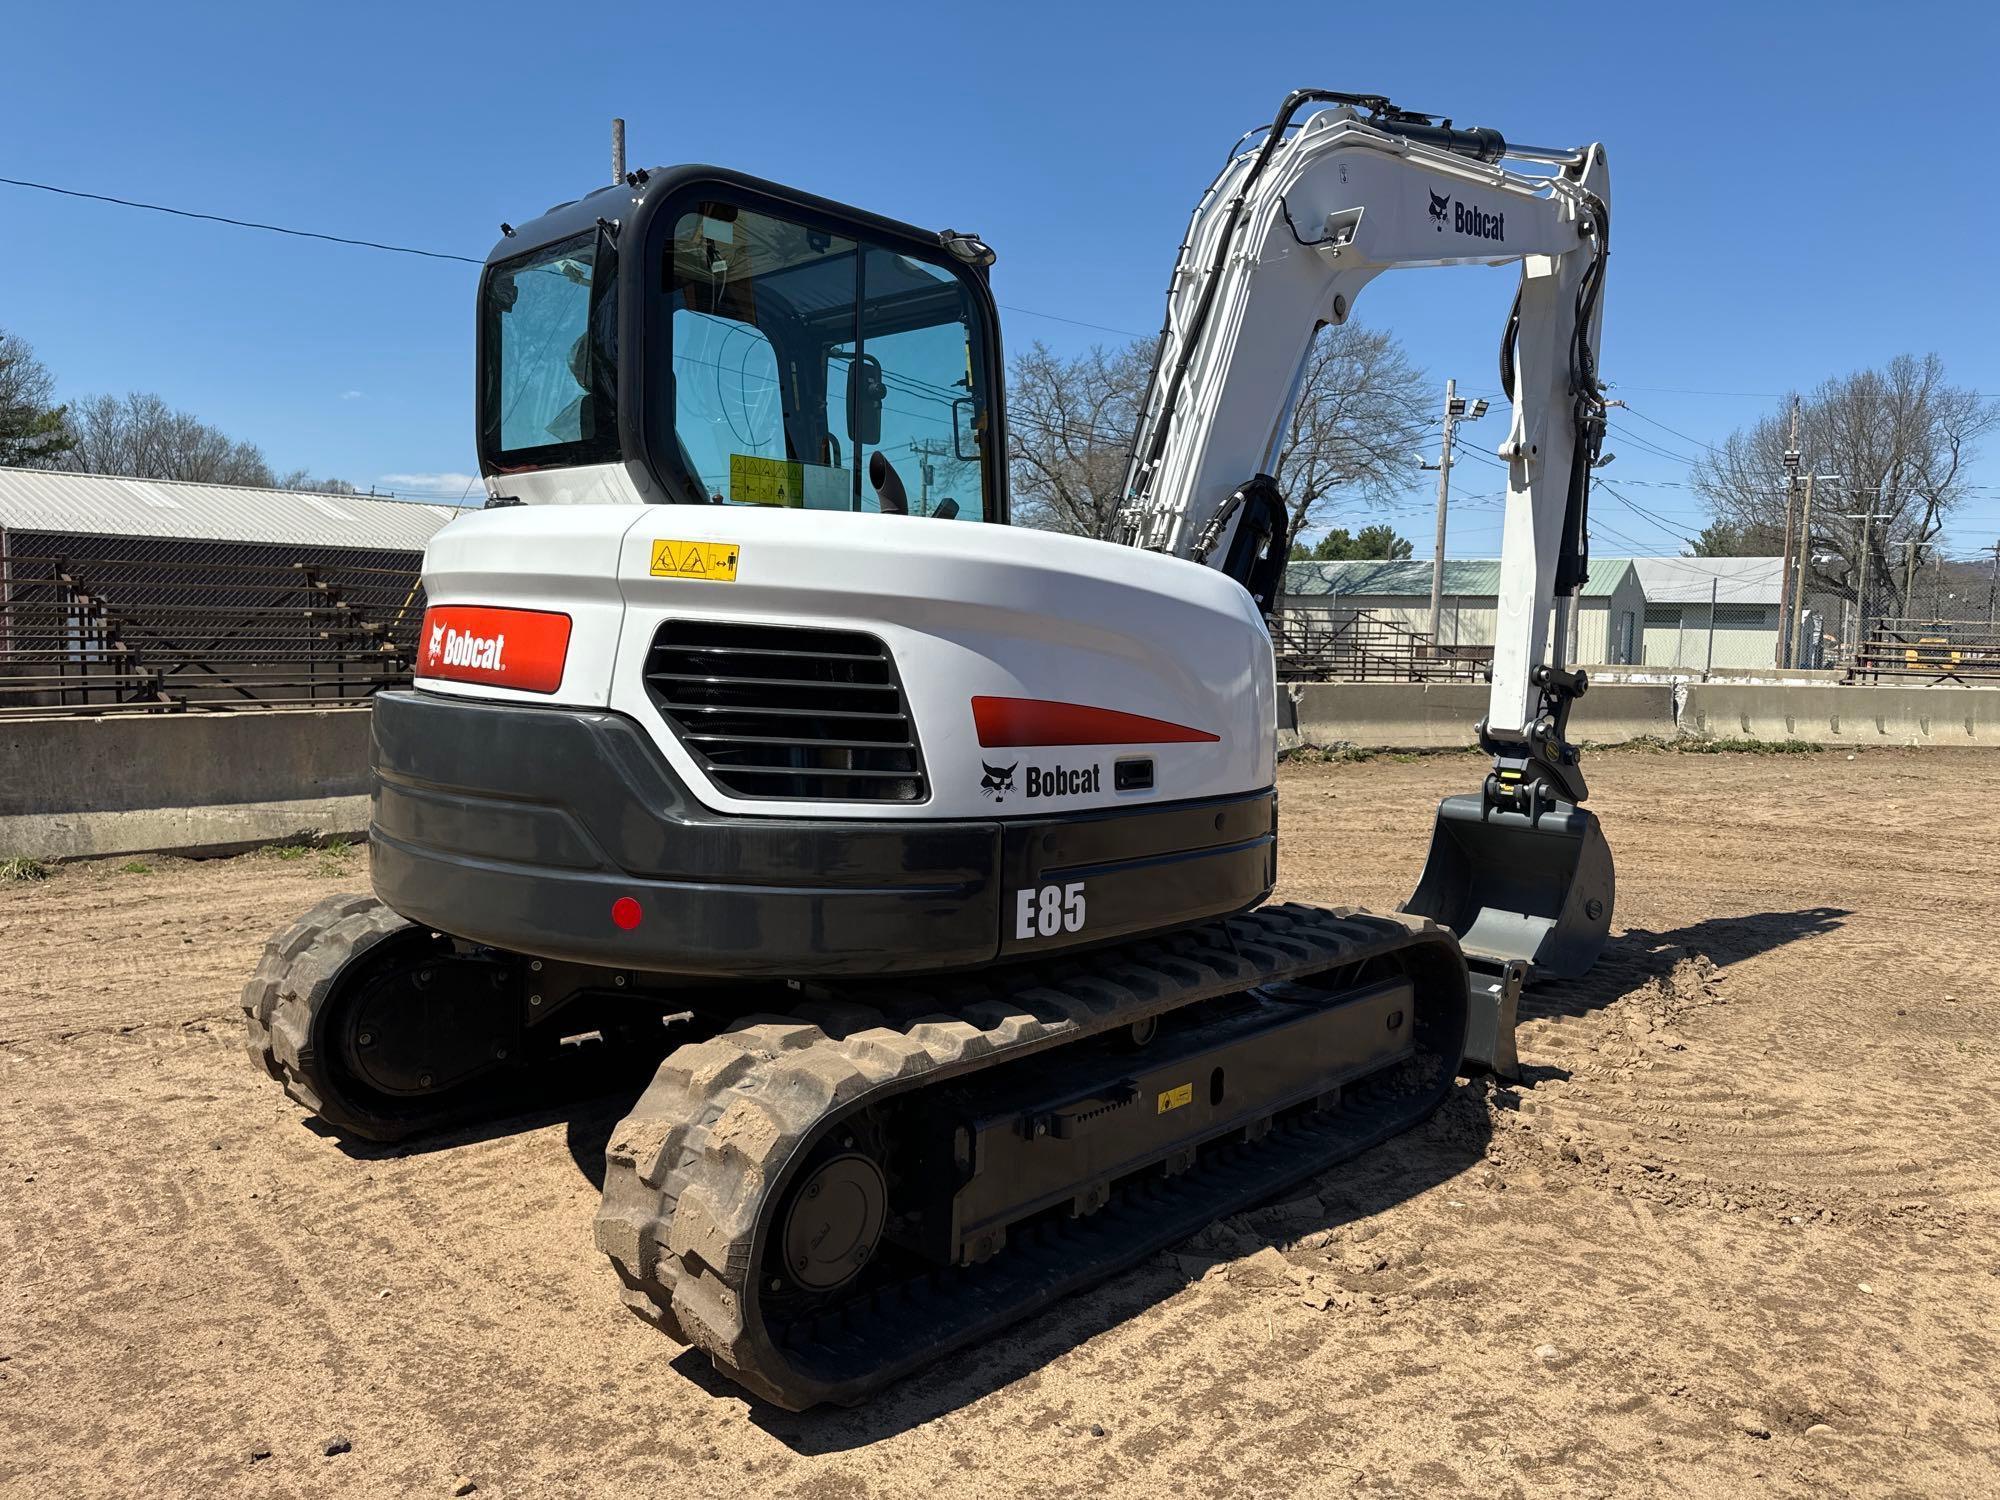 NEW UNUSED 2023 BOBCAT E85 HYDRAULIC EXCAVATOR... SN:15010 powered by diesel engine, equipped with